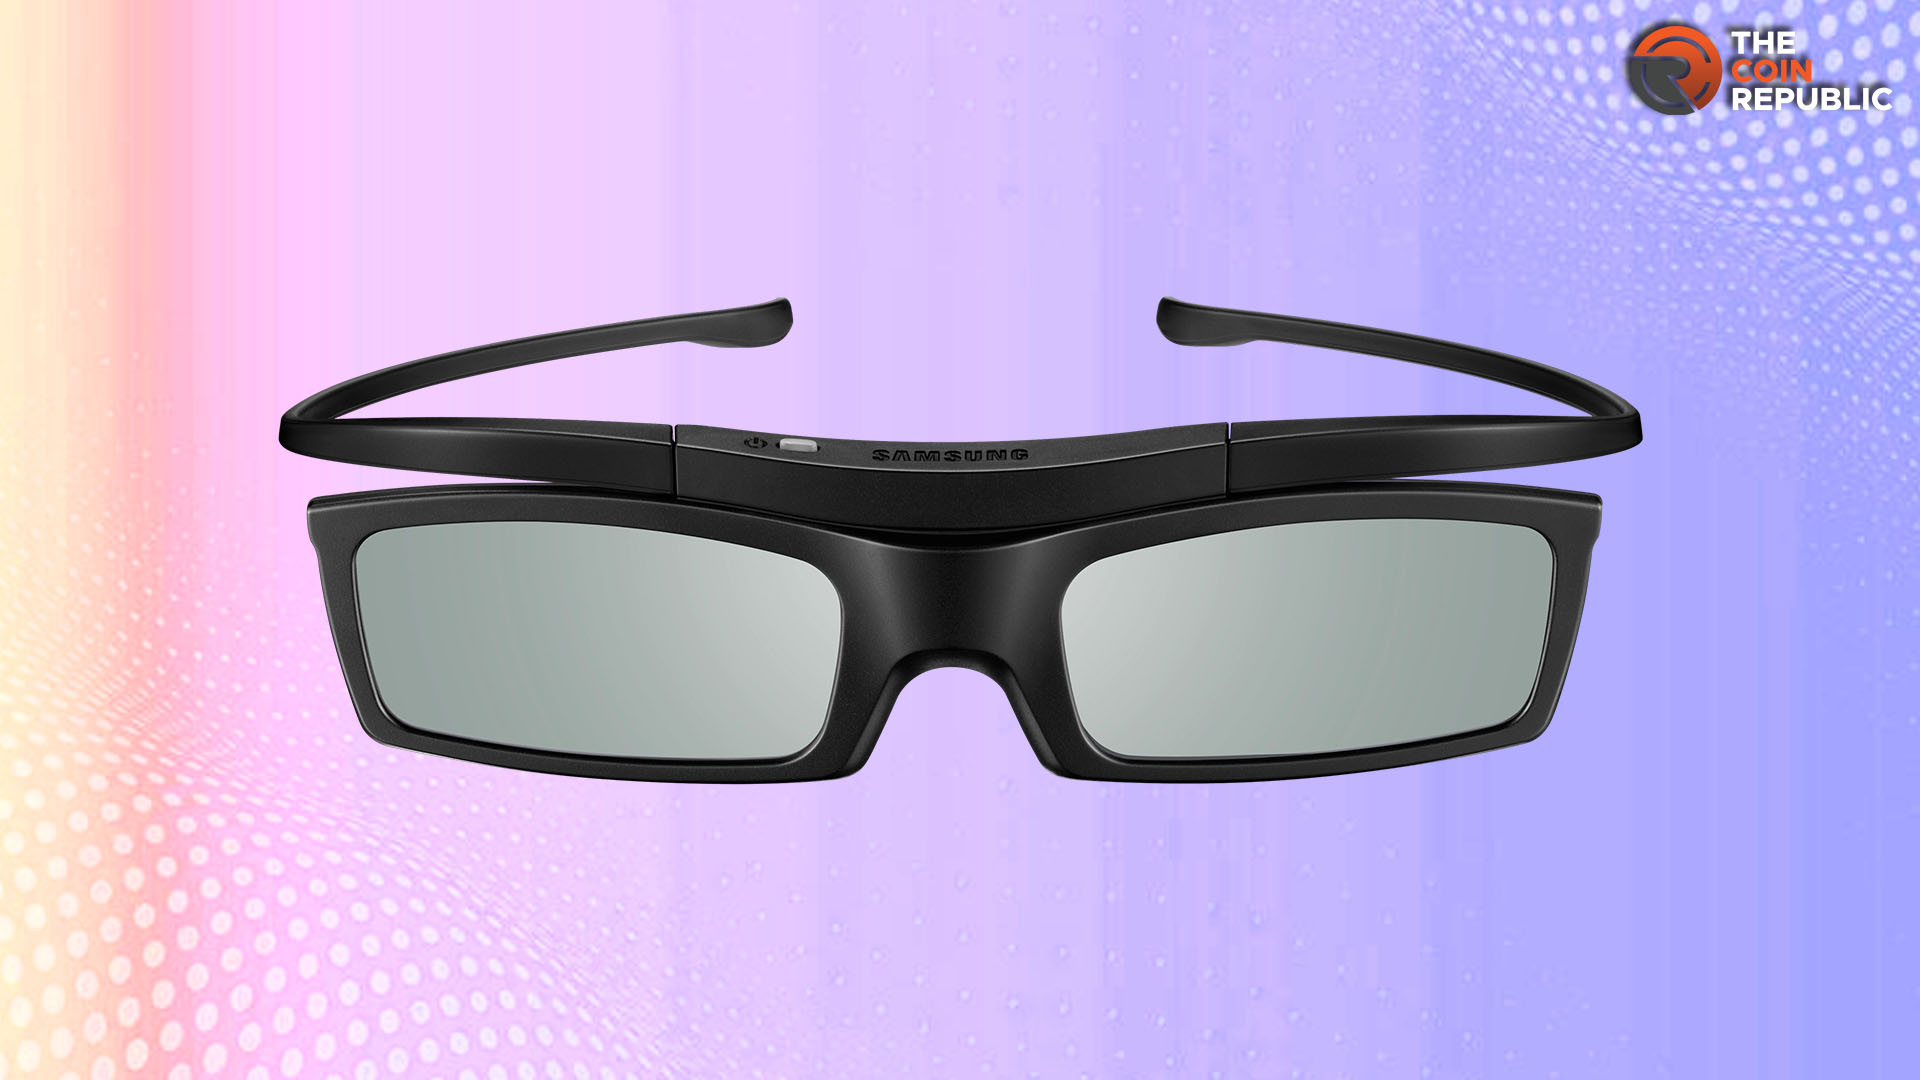 Samsung ‘Smart Glasses’ Could Actually be a HeadMounted Display